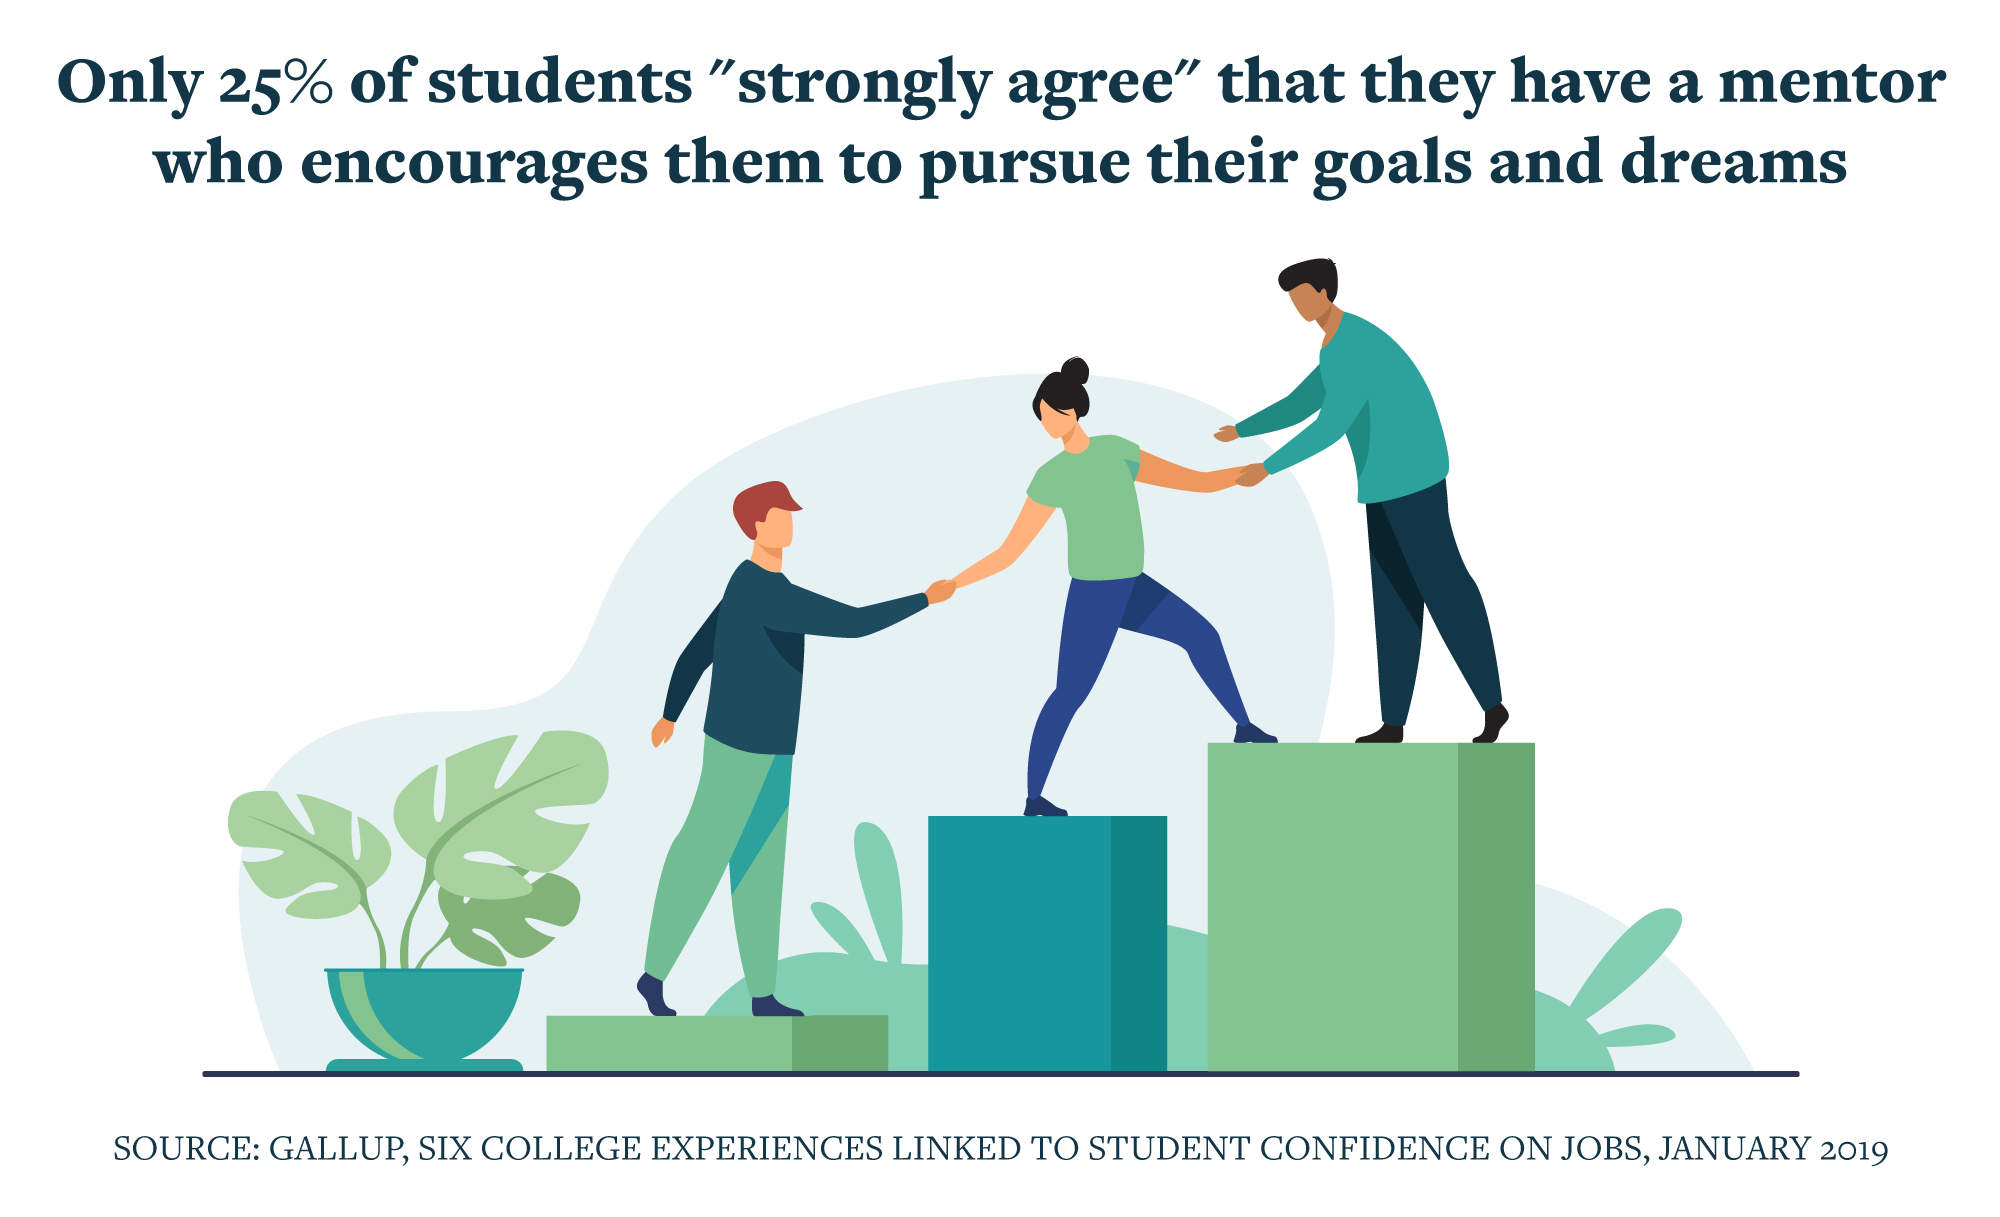 Only 25% of students "strongly agree" that they have a mentor who encourages them to pursue their goals and dreams